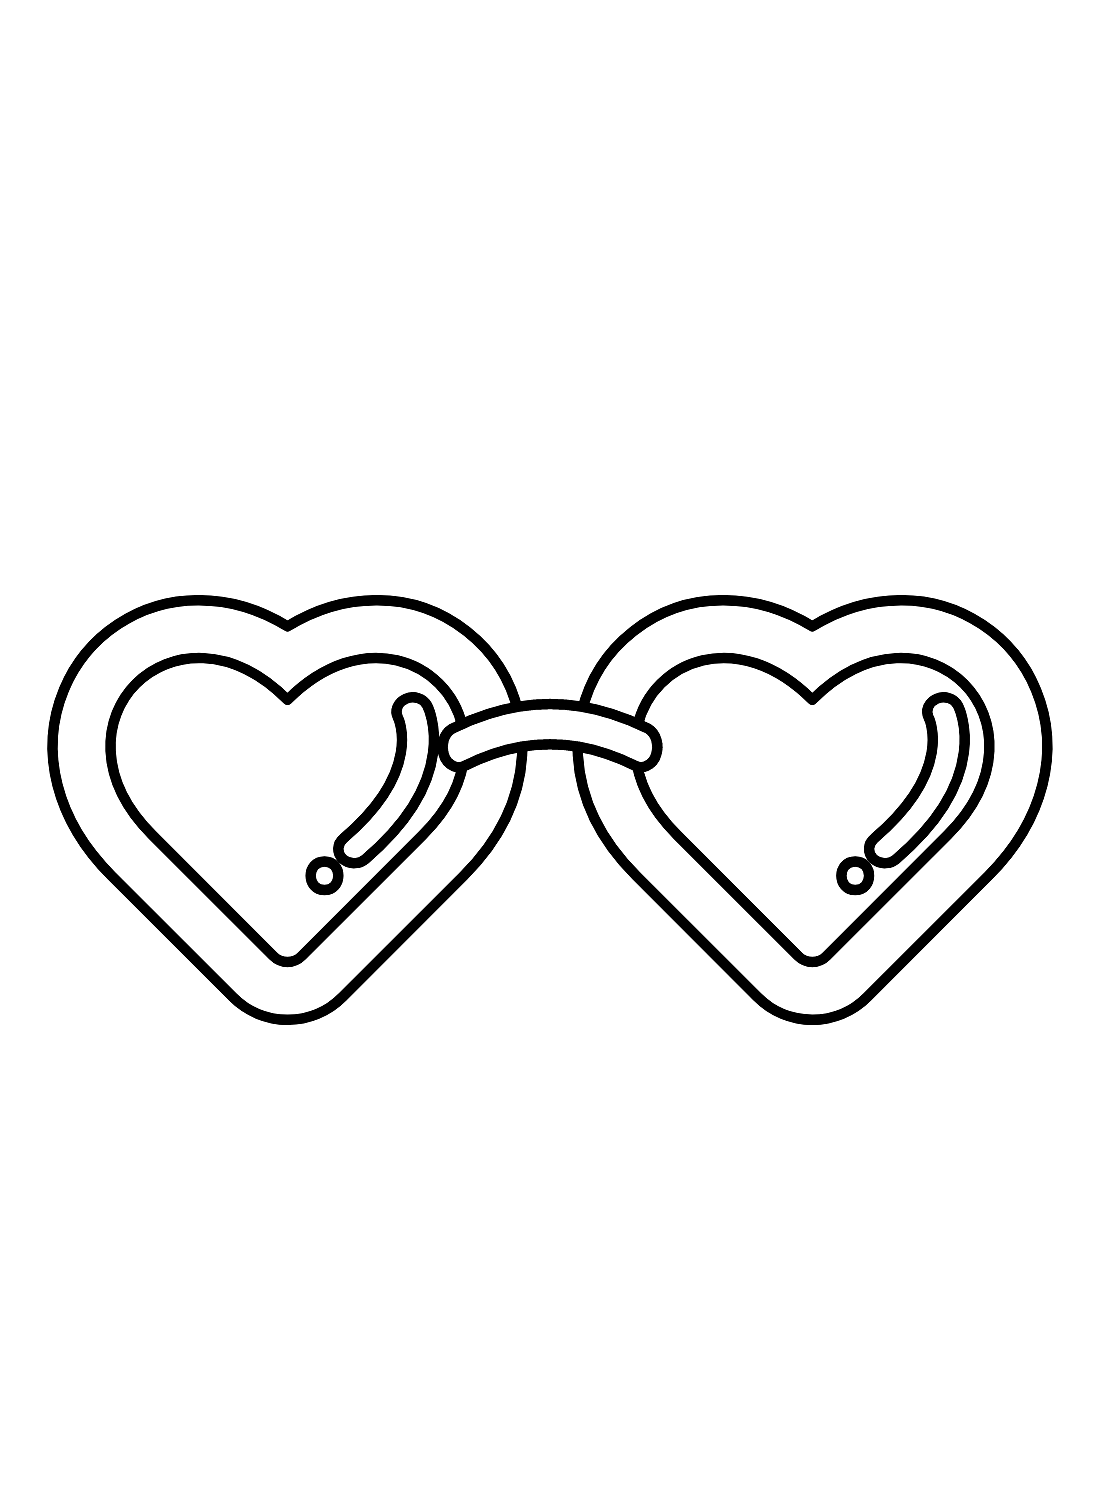 Adorable Heart Sunglasses Coloring Page